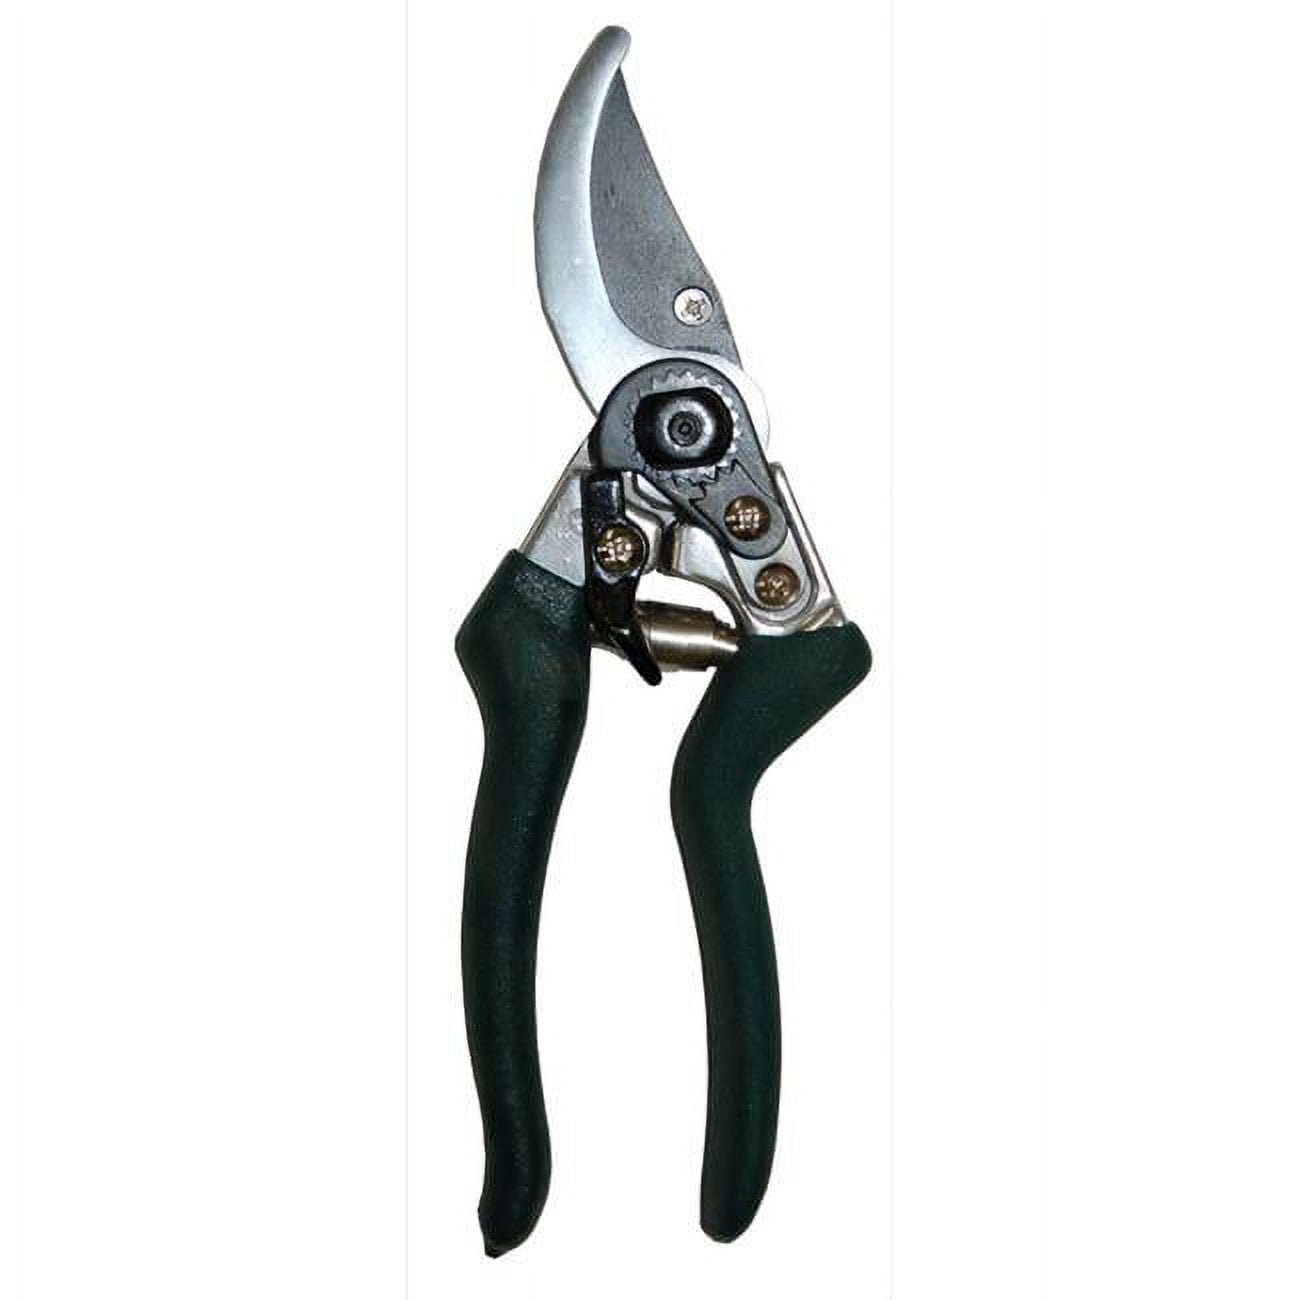 7001300 Rugg Carbon Steel Bypass Pruners